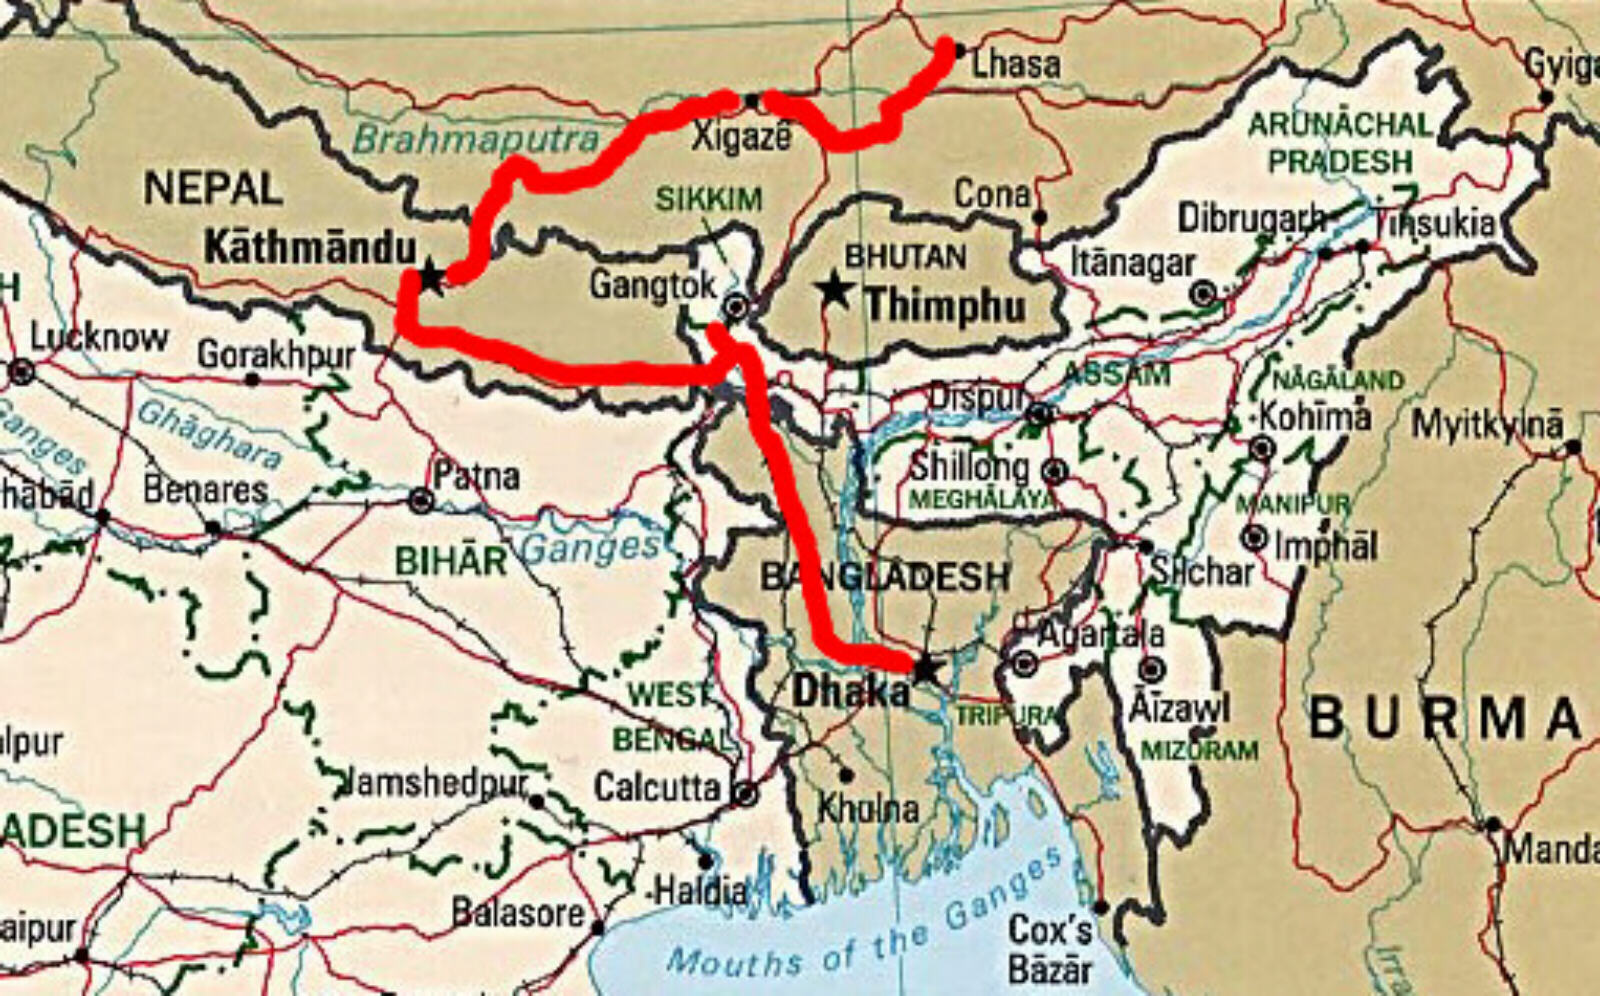 Map from Lhasa to Dhaka